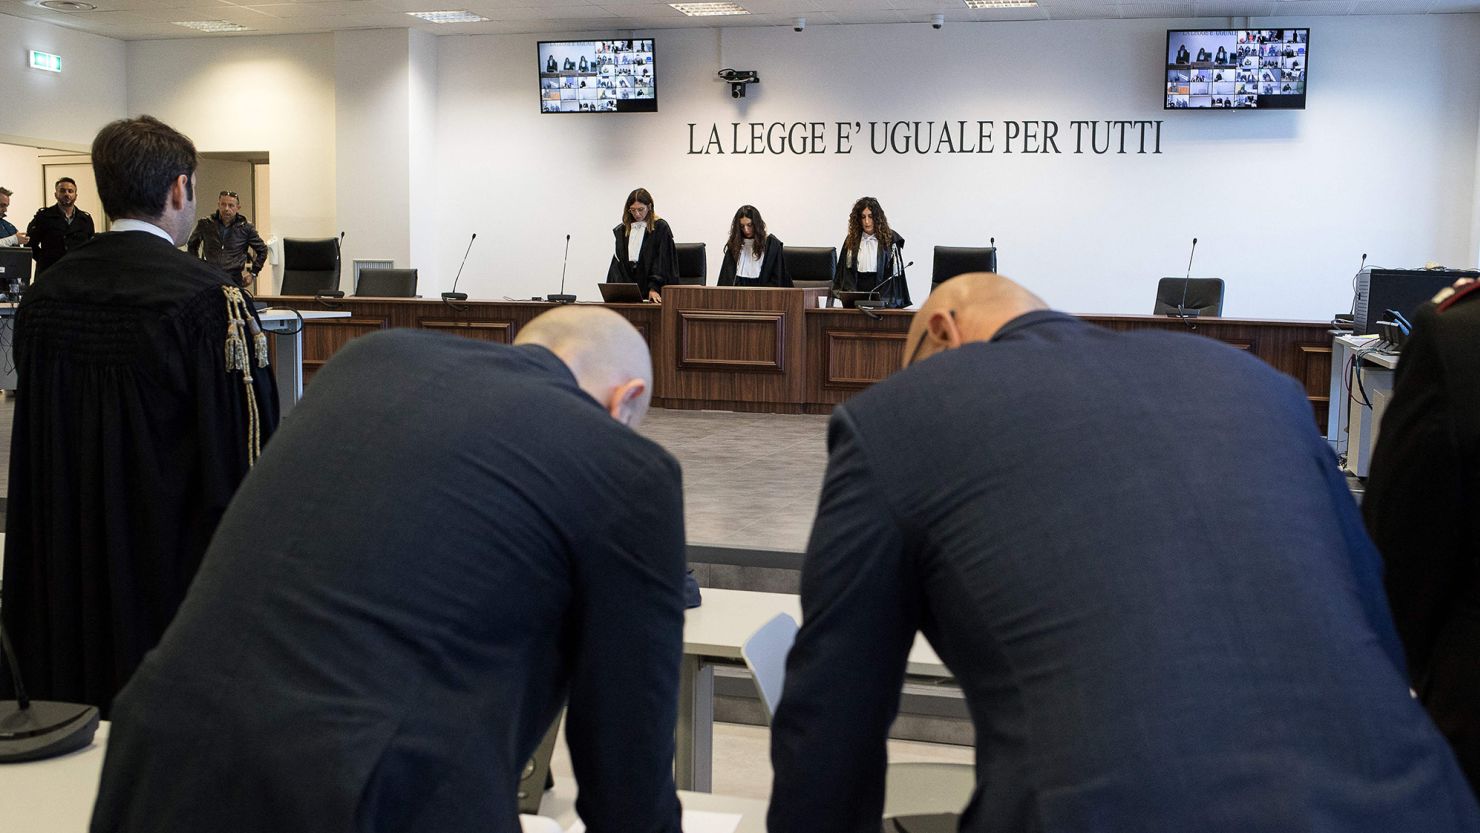 Magistrates stand during the reading of the verdict at the maxi mafia-trial in Lamezia Terme on November 20, 2023 where some 200 people were convicted in the so-called Rinascita Scott trial against alleged members of the 'Ndrangheta mafia in the Calabrian province of Vibo Valentia and the mob's white-collar facilitators. (Photo by Gianluca CHININEA / AFP) (Photo by GIANLUCA CHININEA/AFP via Getty Images)